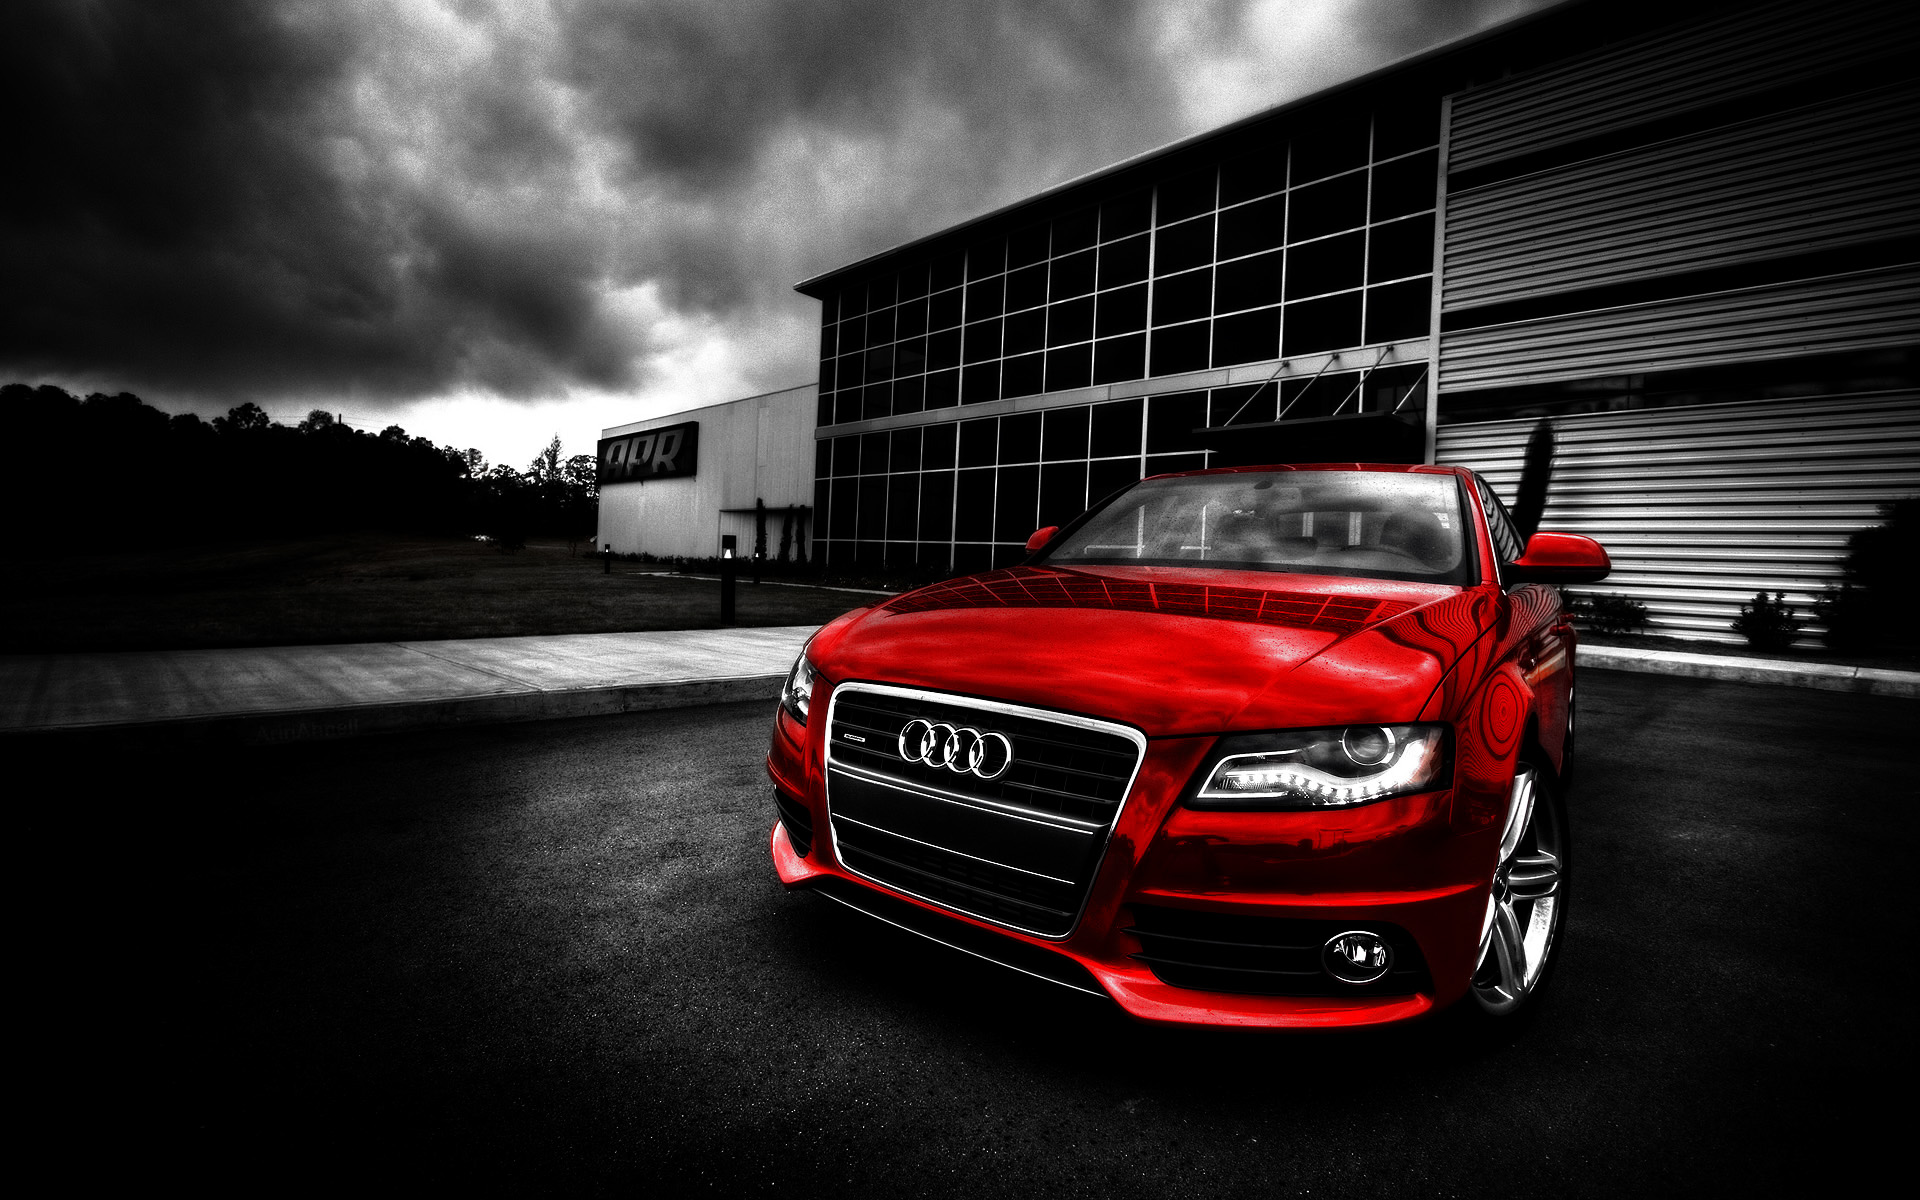 40+ Audi A4 HD Wallpapers and Backgrounds